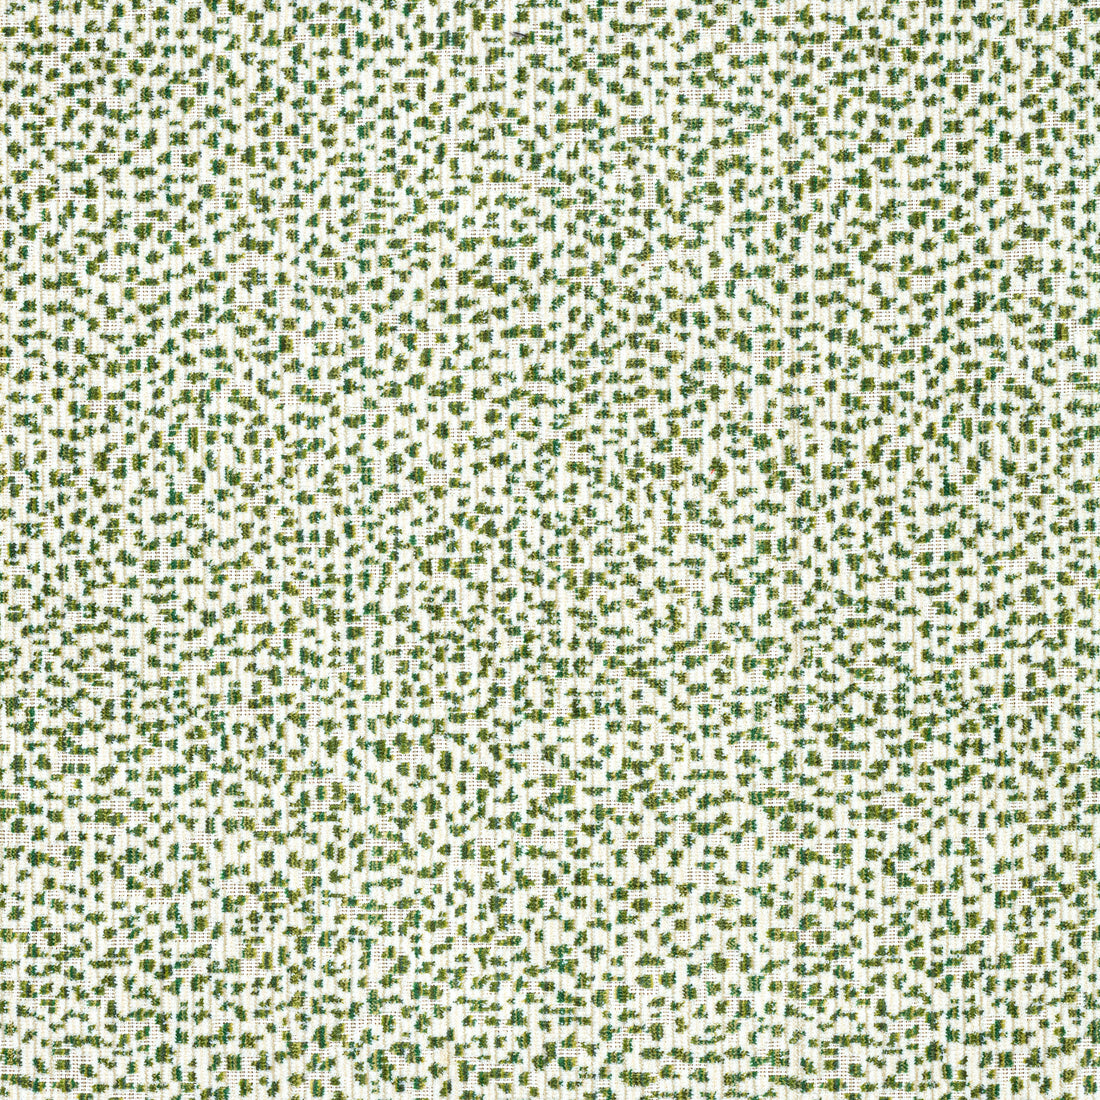 Swing Velvet fabric in emerald color - pattern number W72801 - by Thibaut in the Woven Resource 13: Fusion Velvets collection